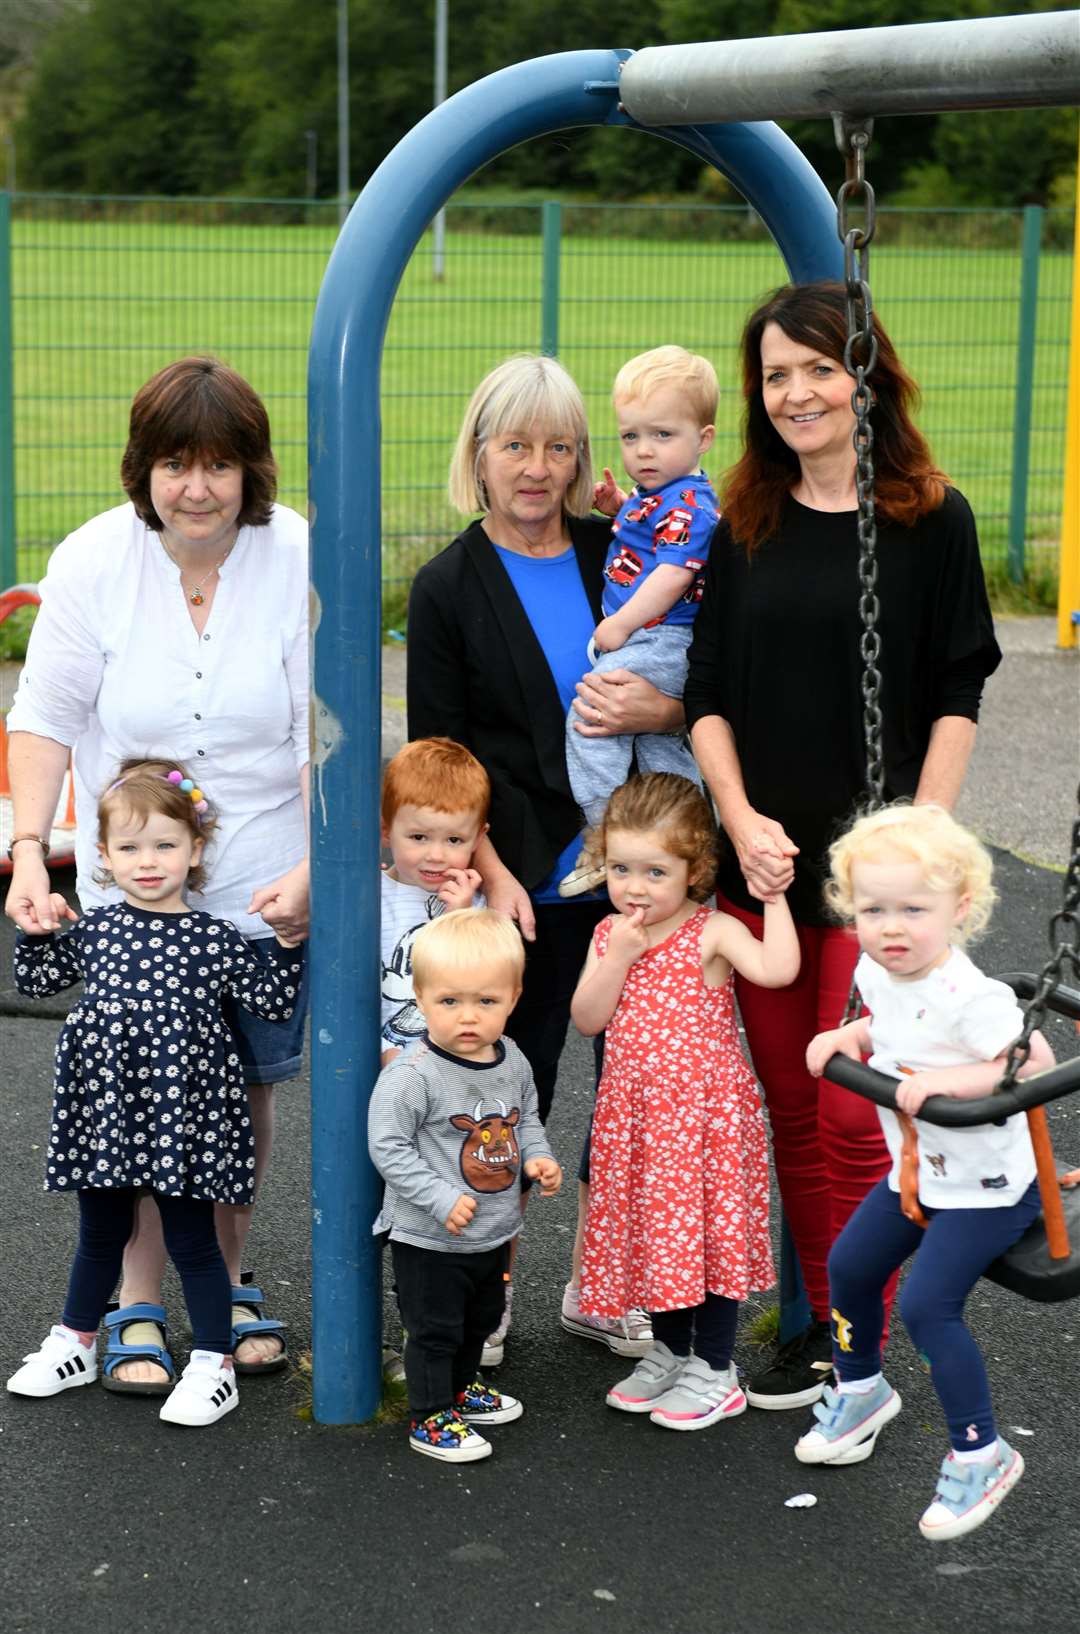 Sharon Gray from the local community with Corran Donaldson, Owen and Lyle Urquhart, Marie Maciver, Dalneigh Playpark Project, Kay Maclean, Emmie Macdonald, Liz Macintyre, Dalneigh Playpark Project and Aria Maclean. Picture: James Mackenzie.